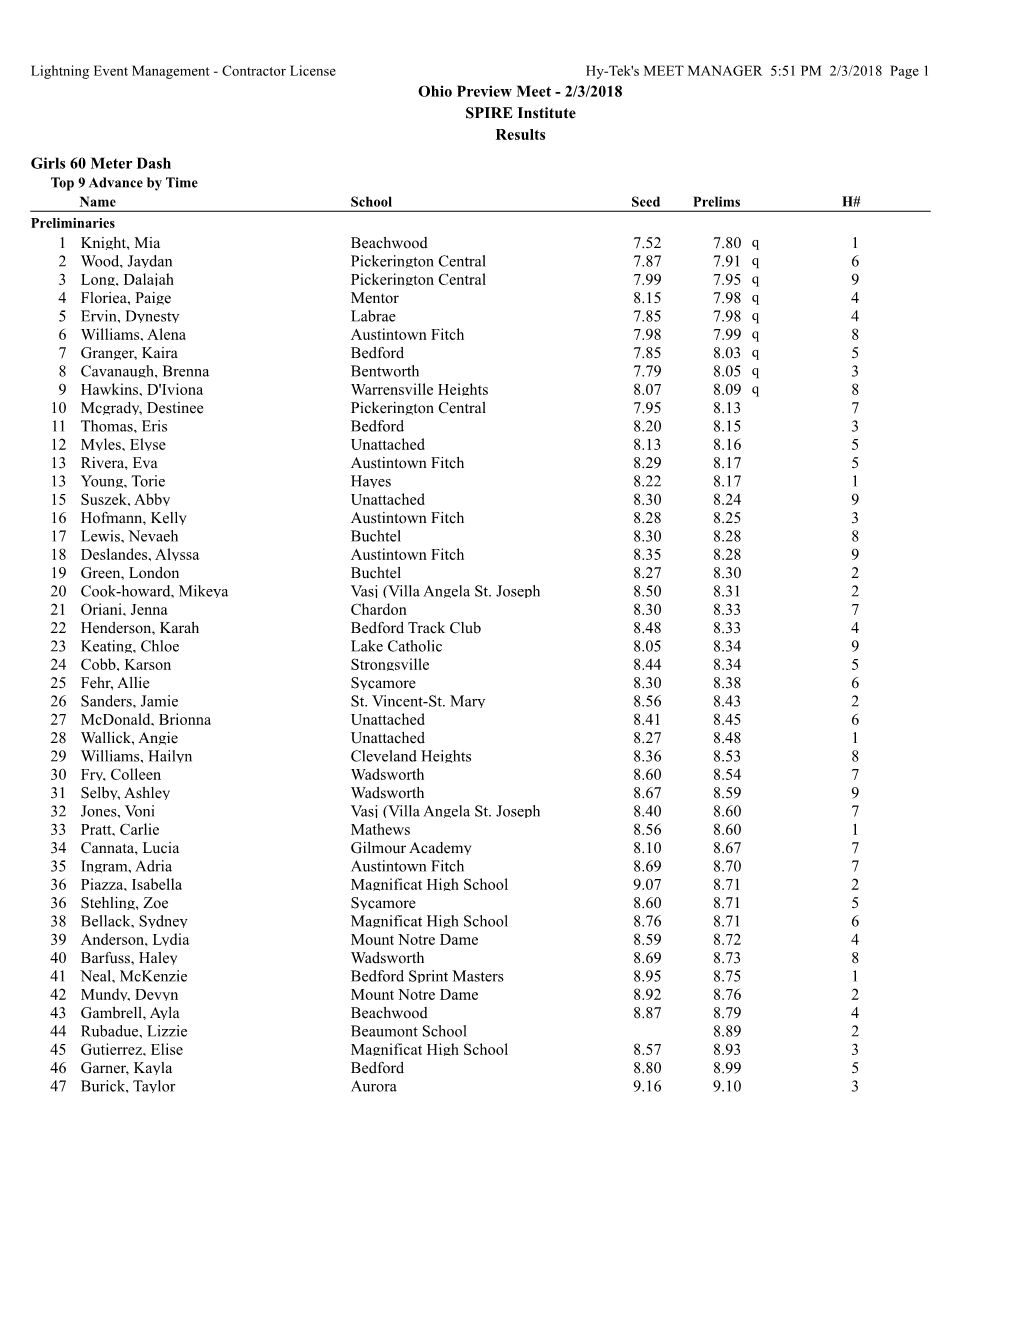 Ohio Preview Meet - 2/3/2018 SPIRE Institute Results